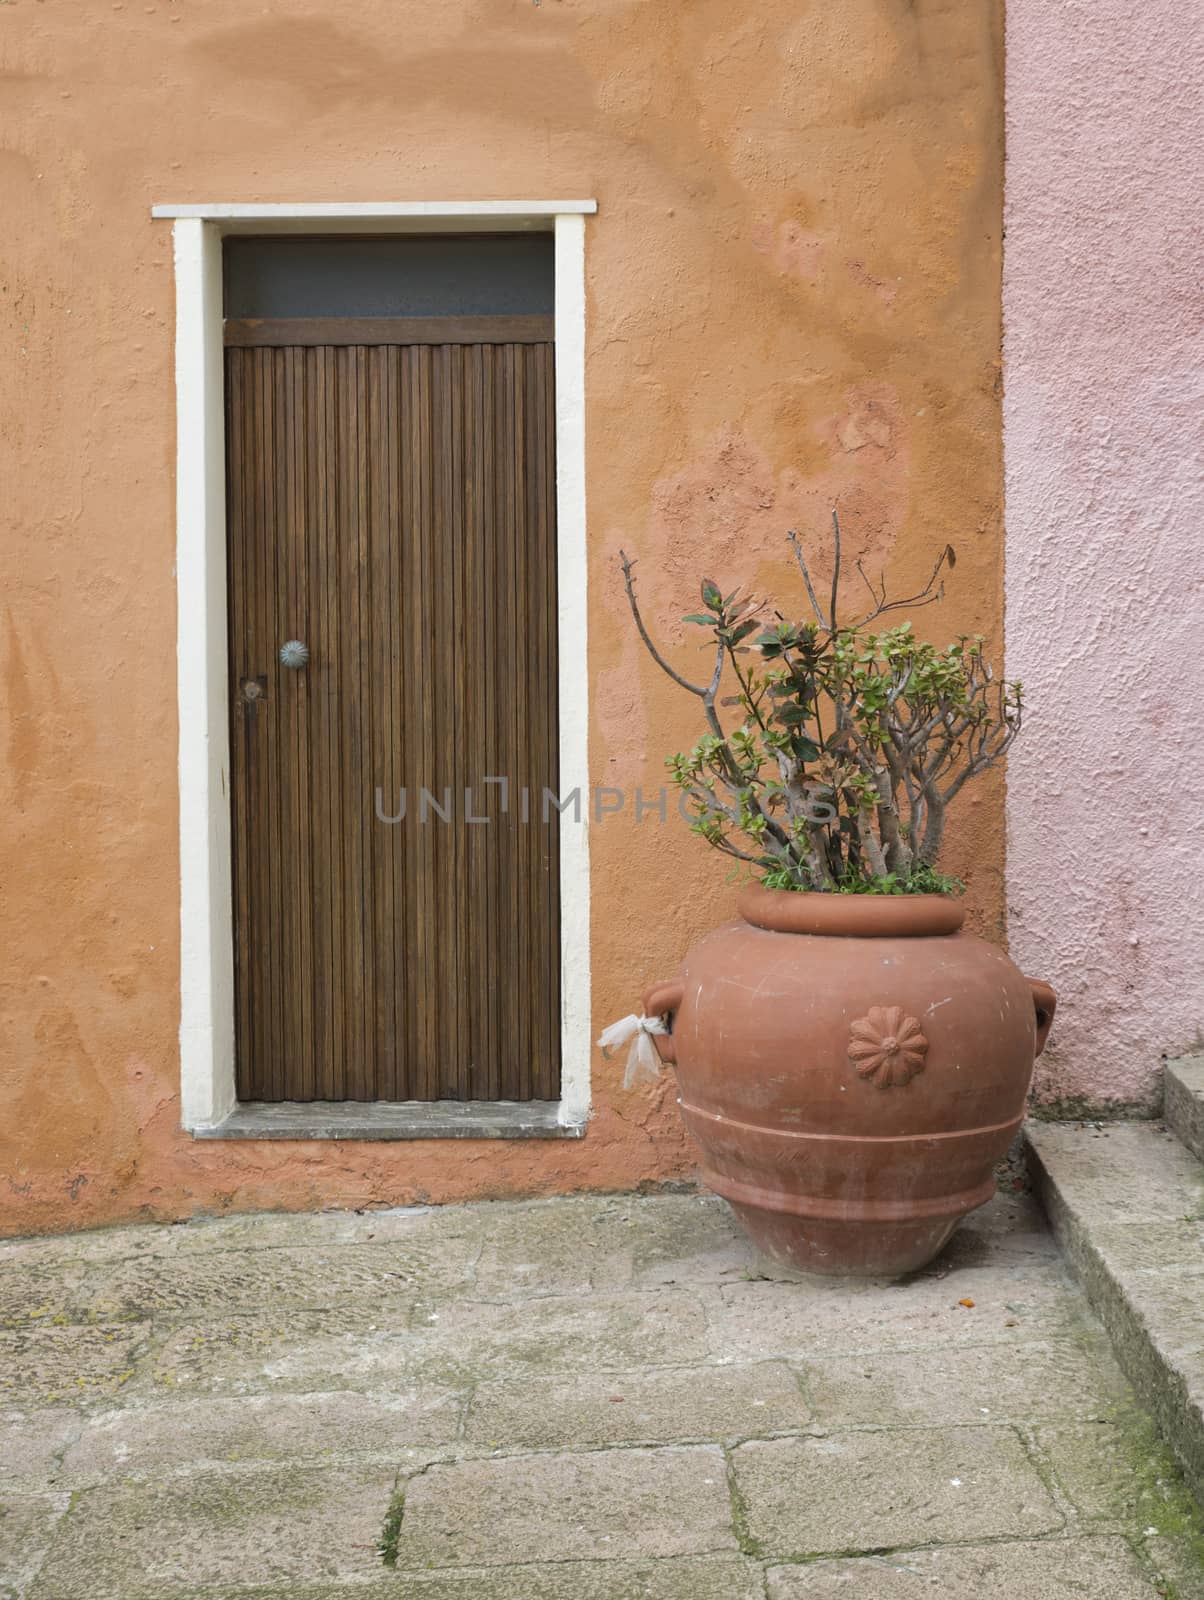 painted wall with door and vase with plant in front on the street on sardinia island italy 